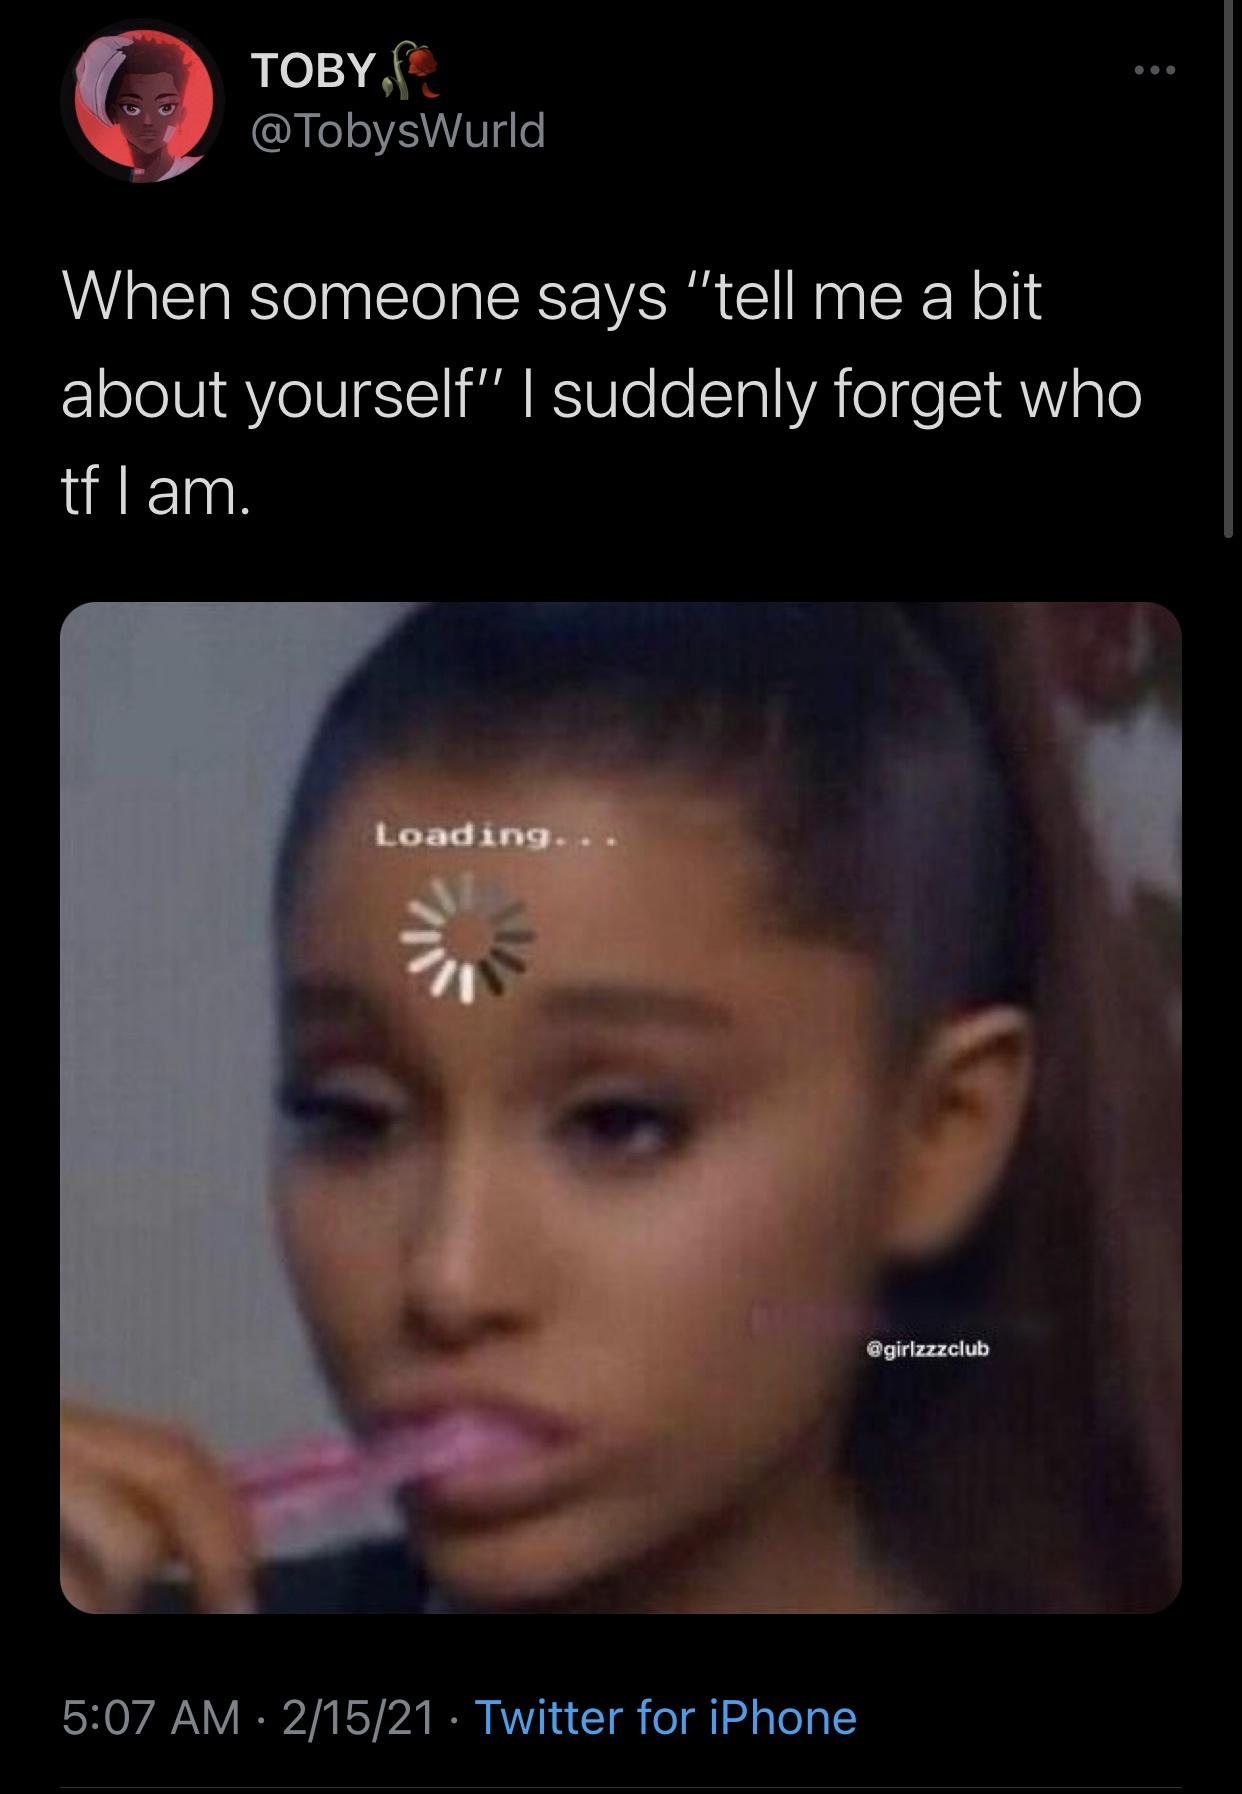 ariana grande meme - Toby, When someone says "tell me a bit about yourself" I suddenly forget who tflam. Loading... 21521 Twitter for iPhone